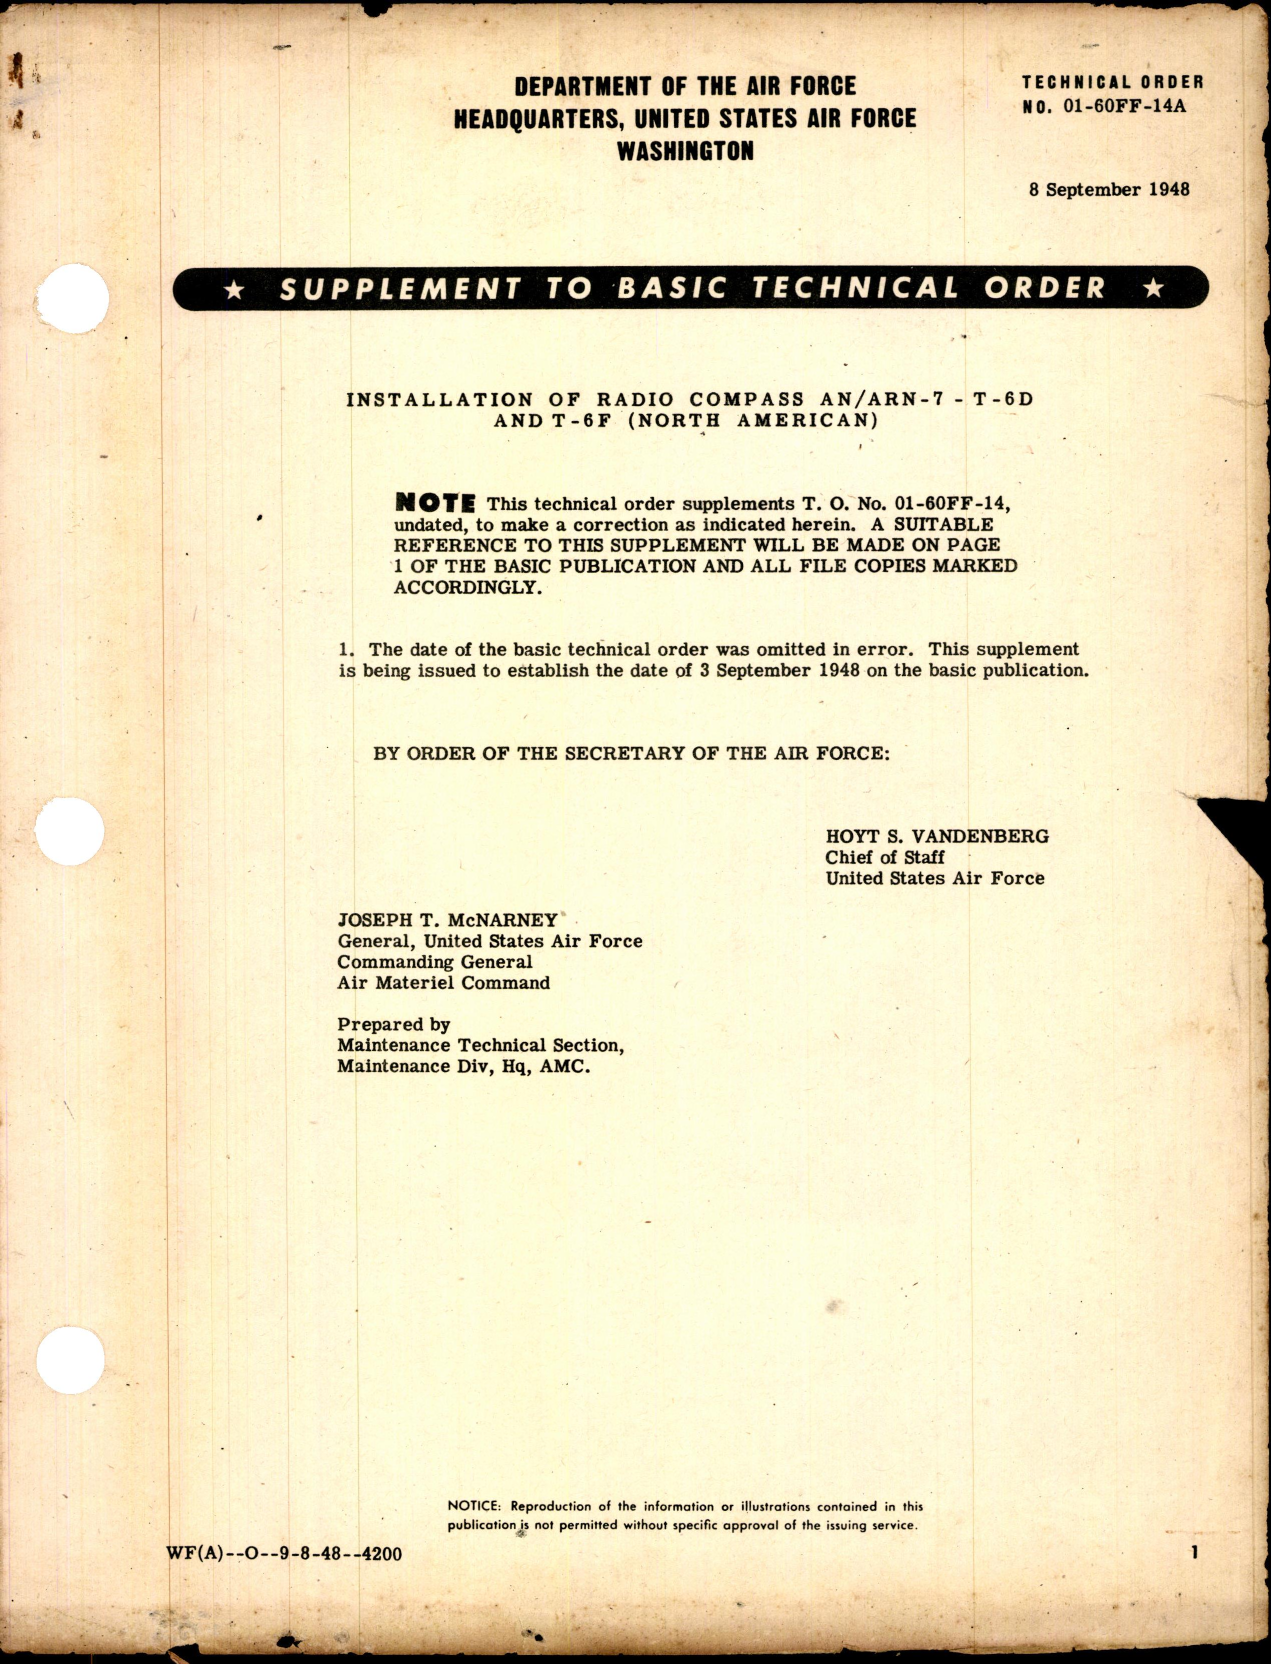 Sample page 1 from AirCorps Library document: Installation of Radio Compass AN/ARN-7 for T-6D and T-6F